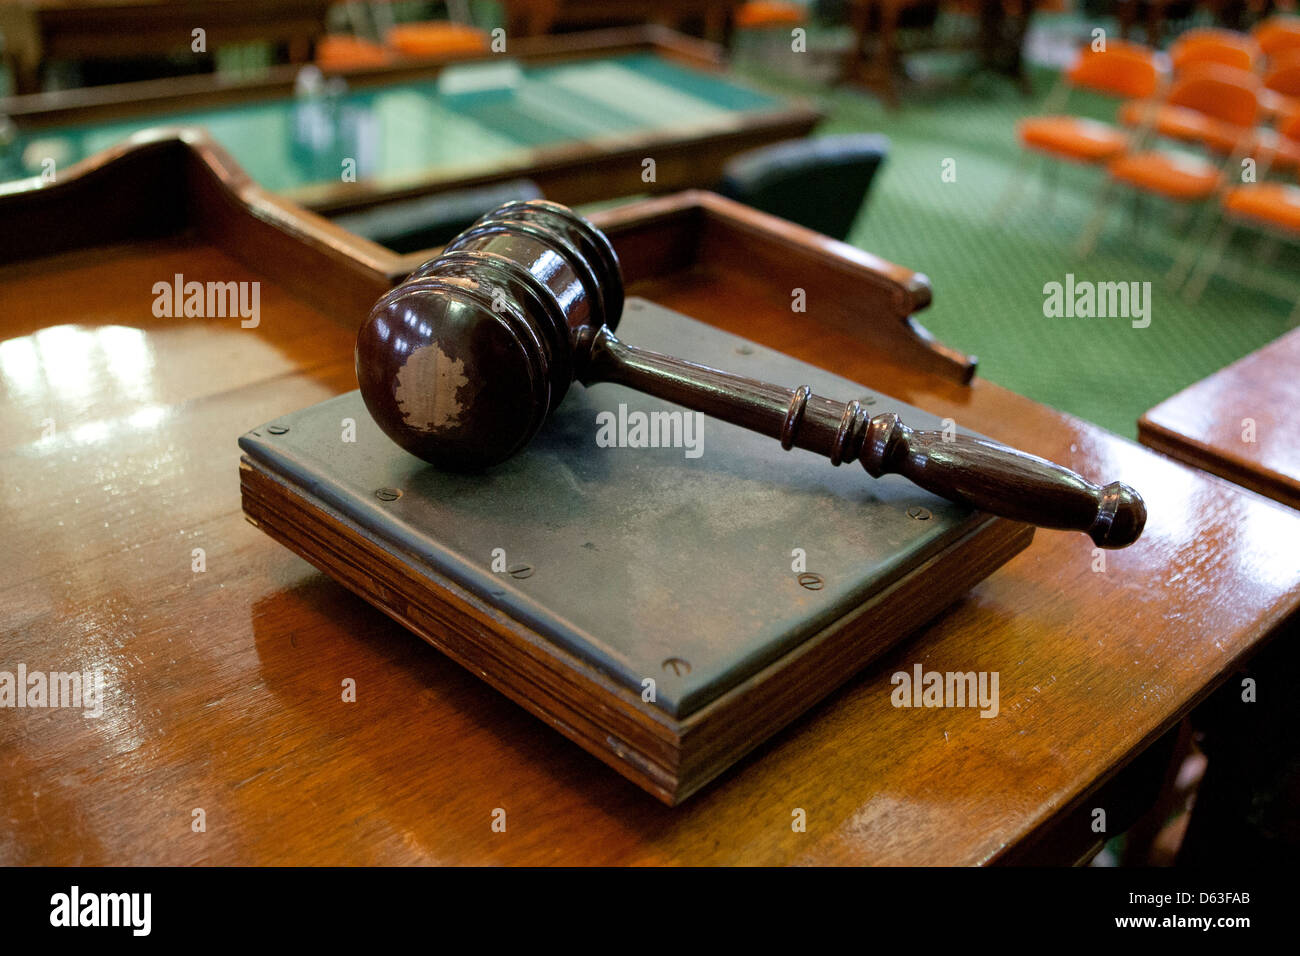 Wood gavel lays on desk inside the Senate of the Texas Capitol building in Austin, Texas Stock Photo